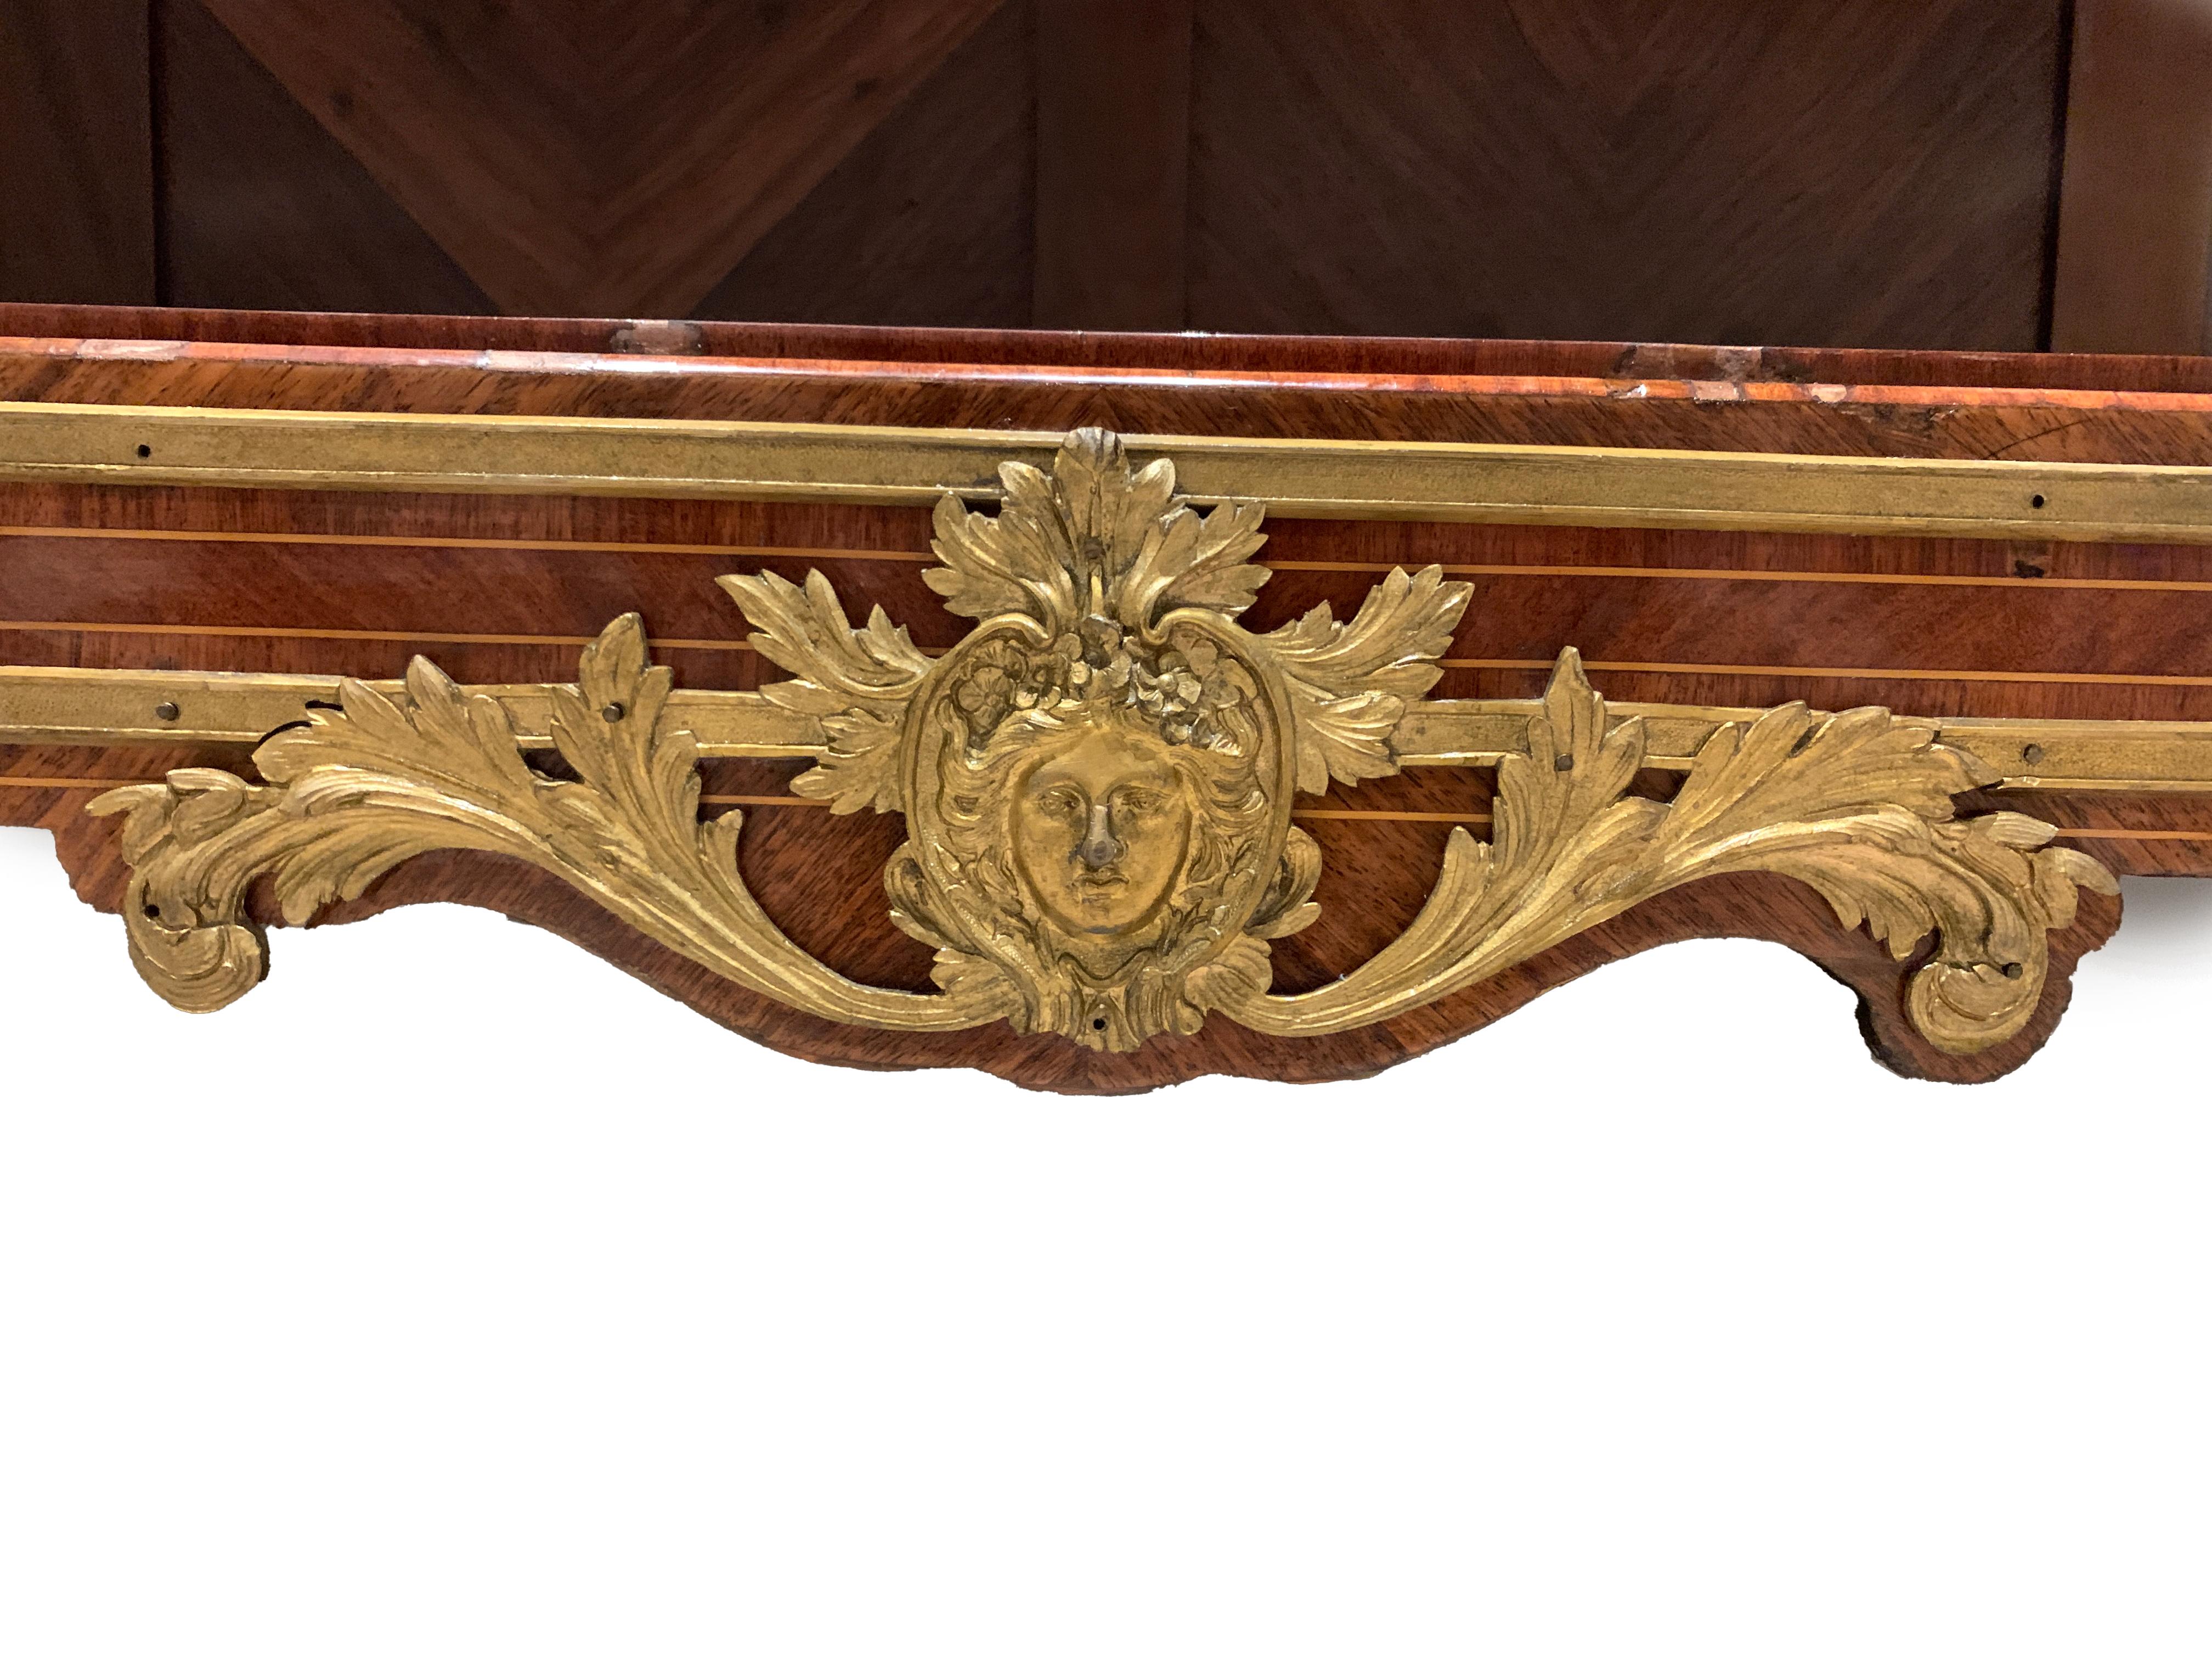 19th Century French Ormolu-Mounted Kingwood Bibliotheque For Sale